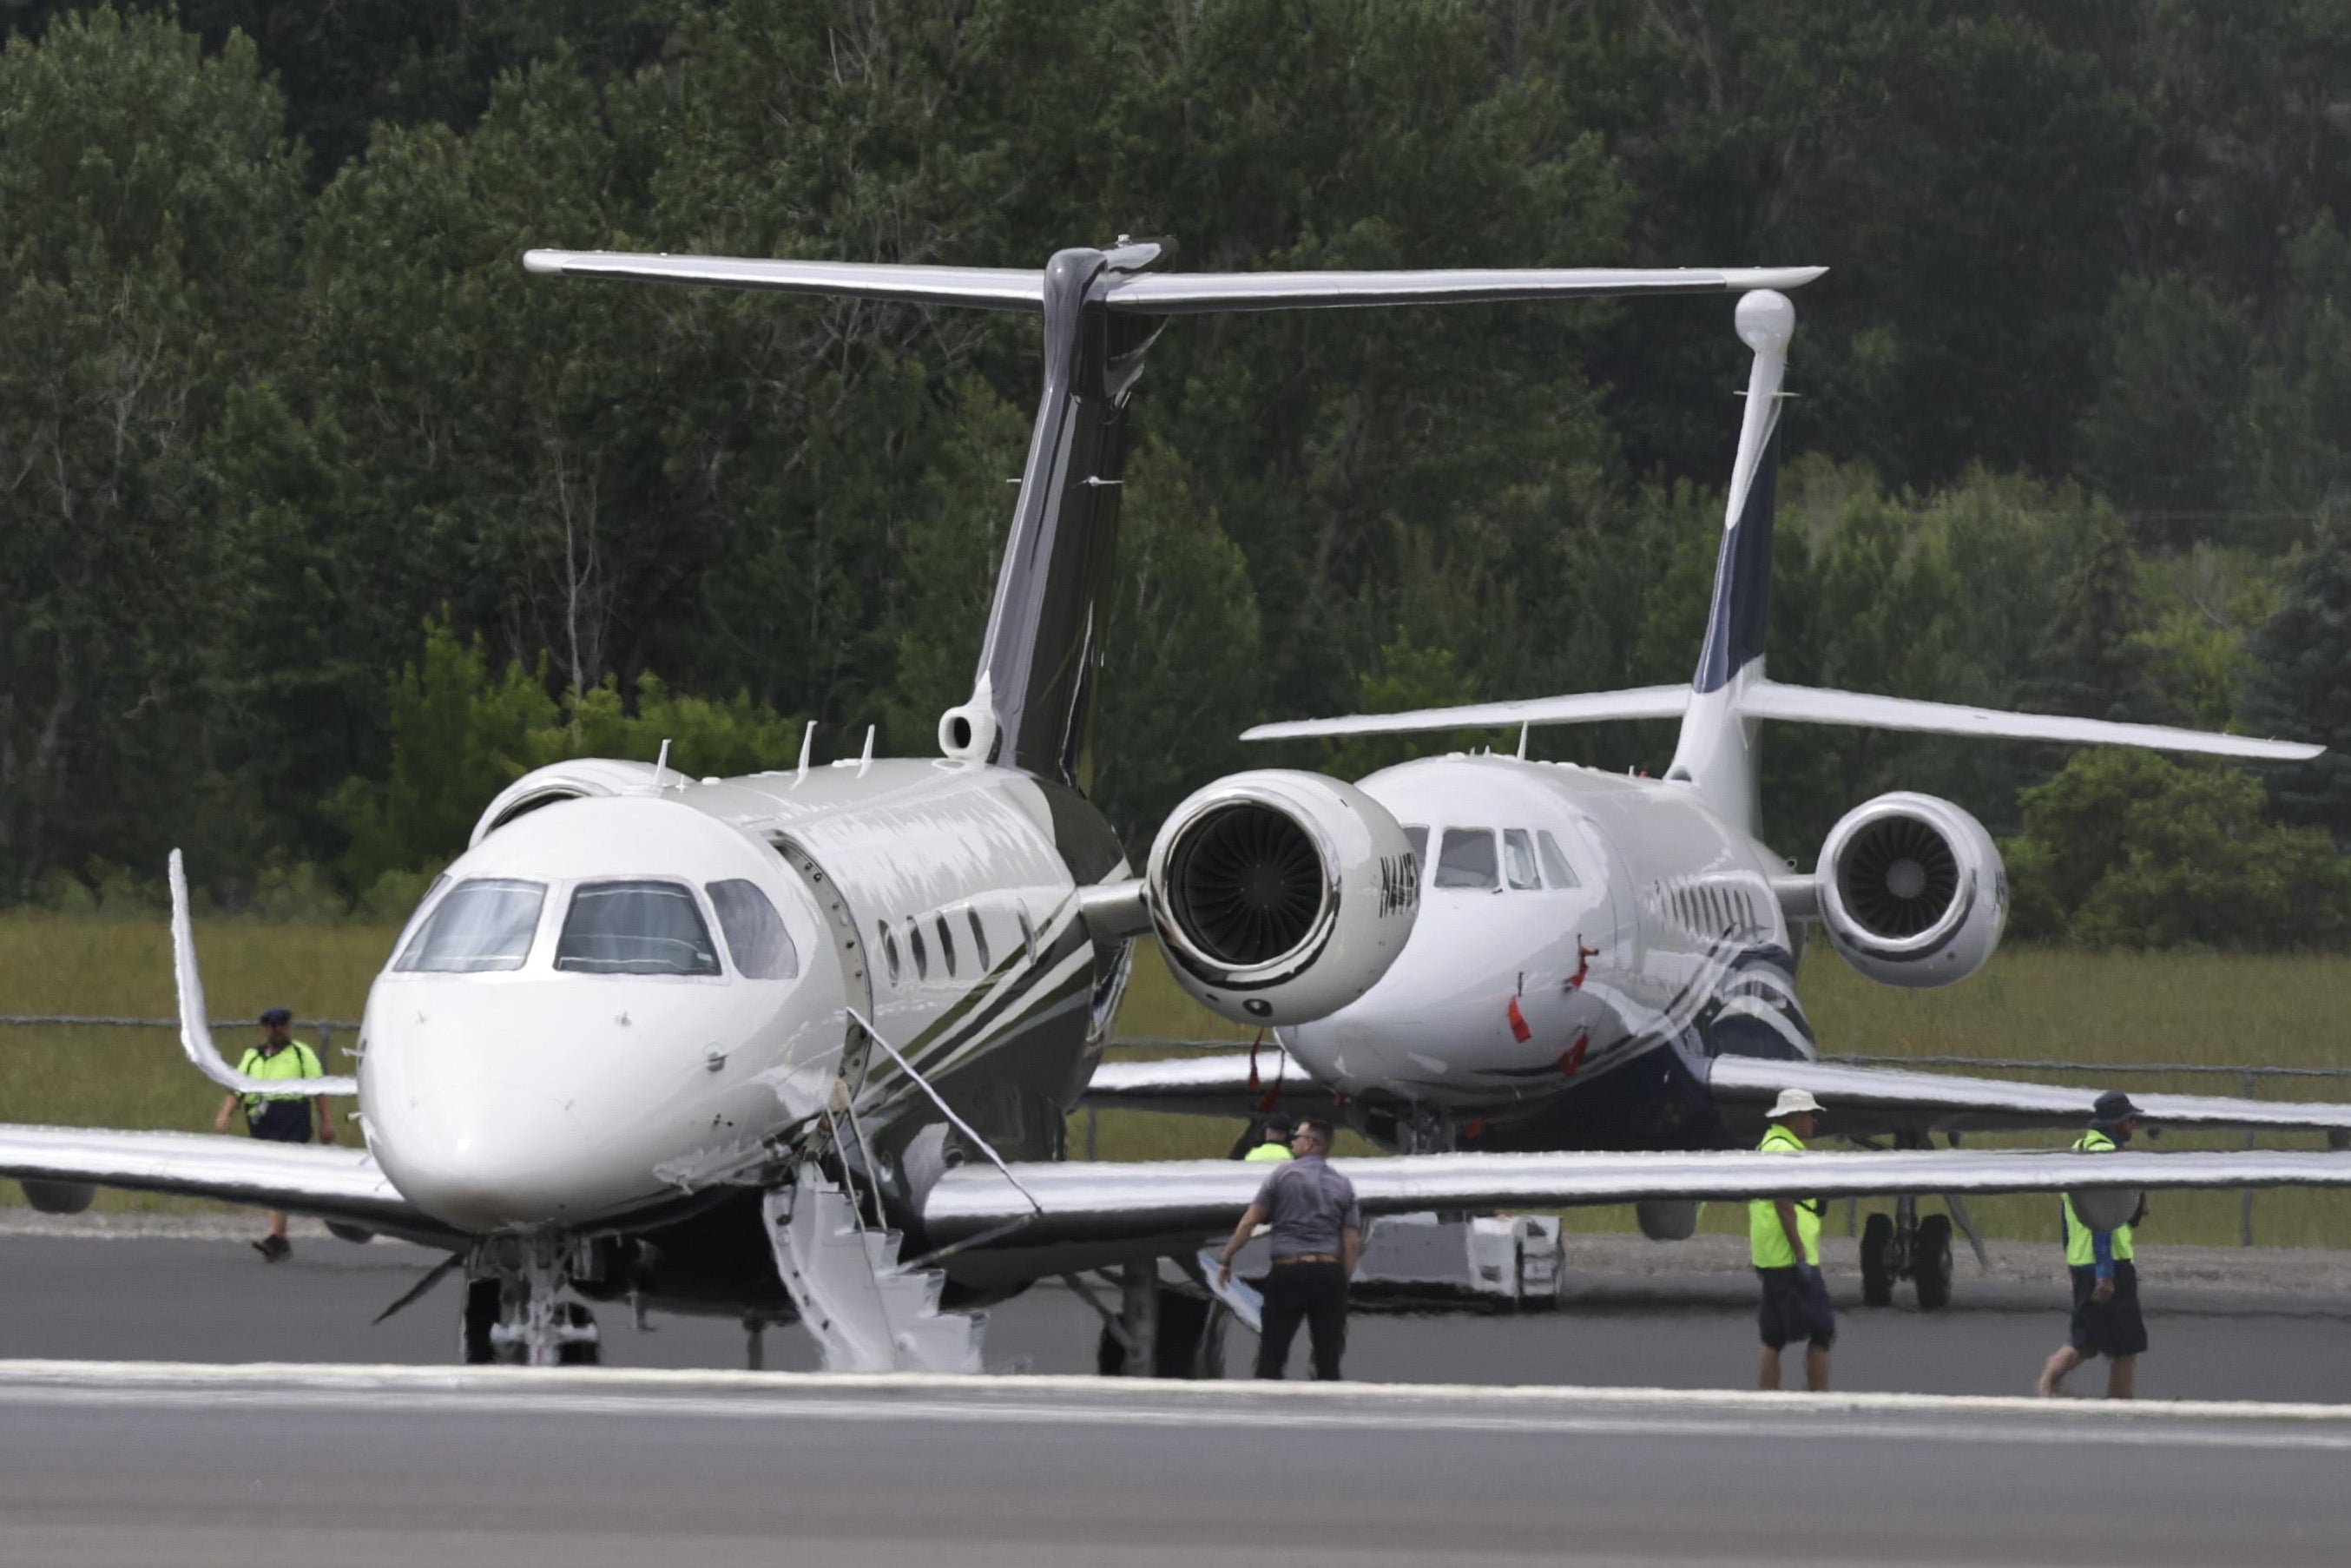 Two private jets are seen on tarmac